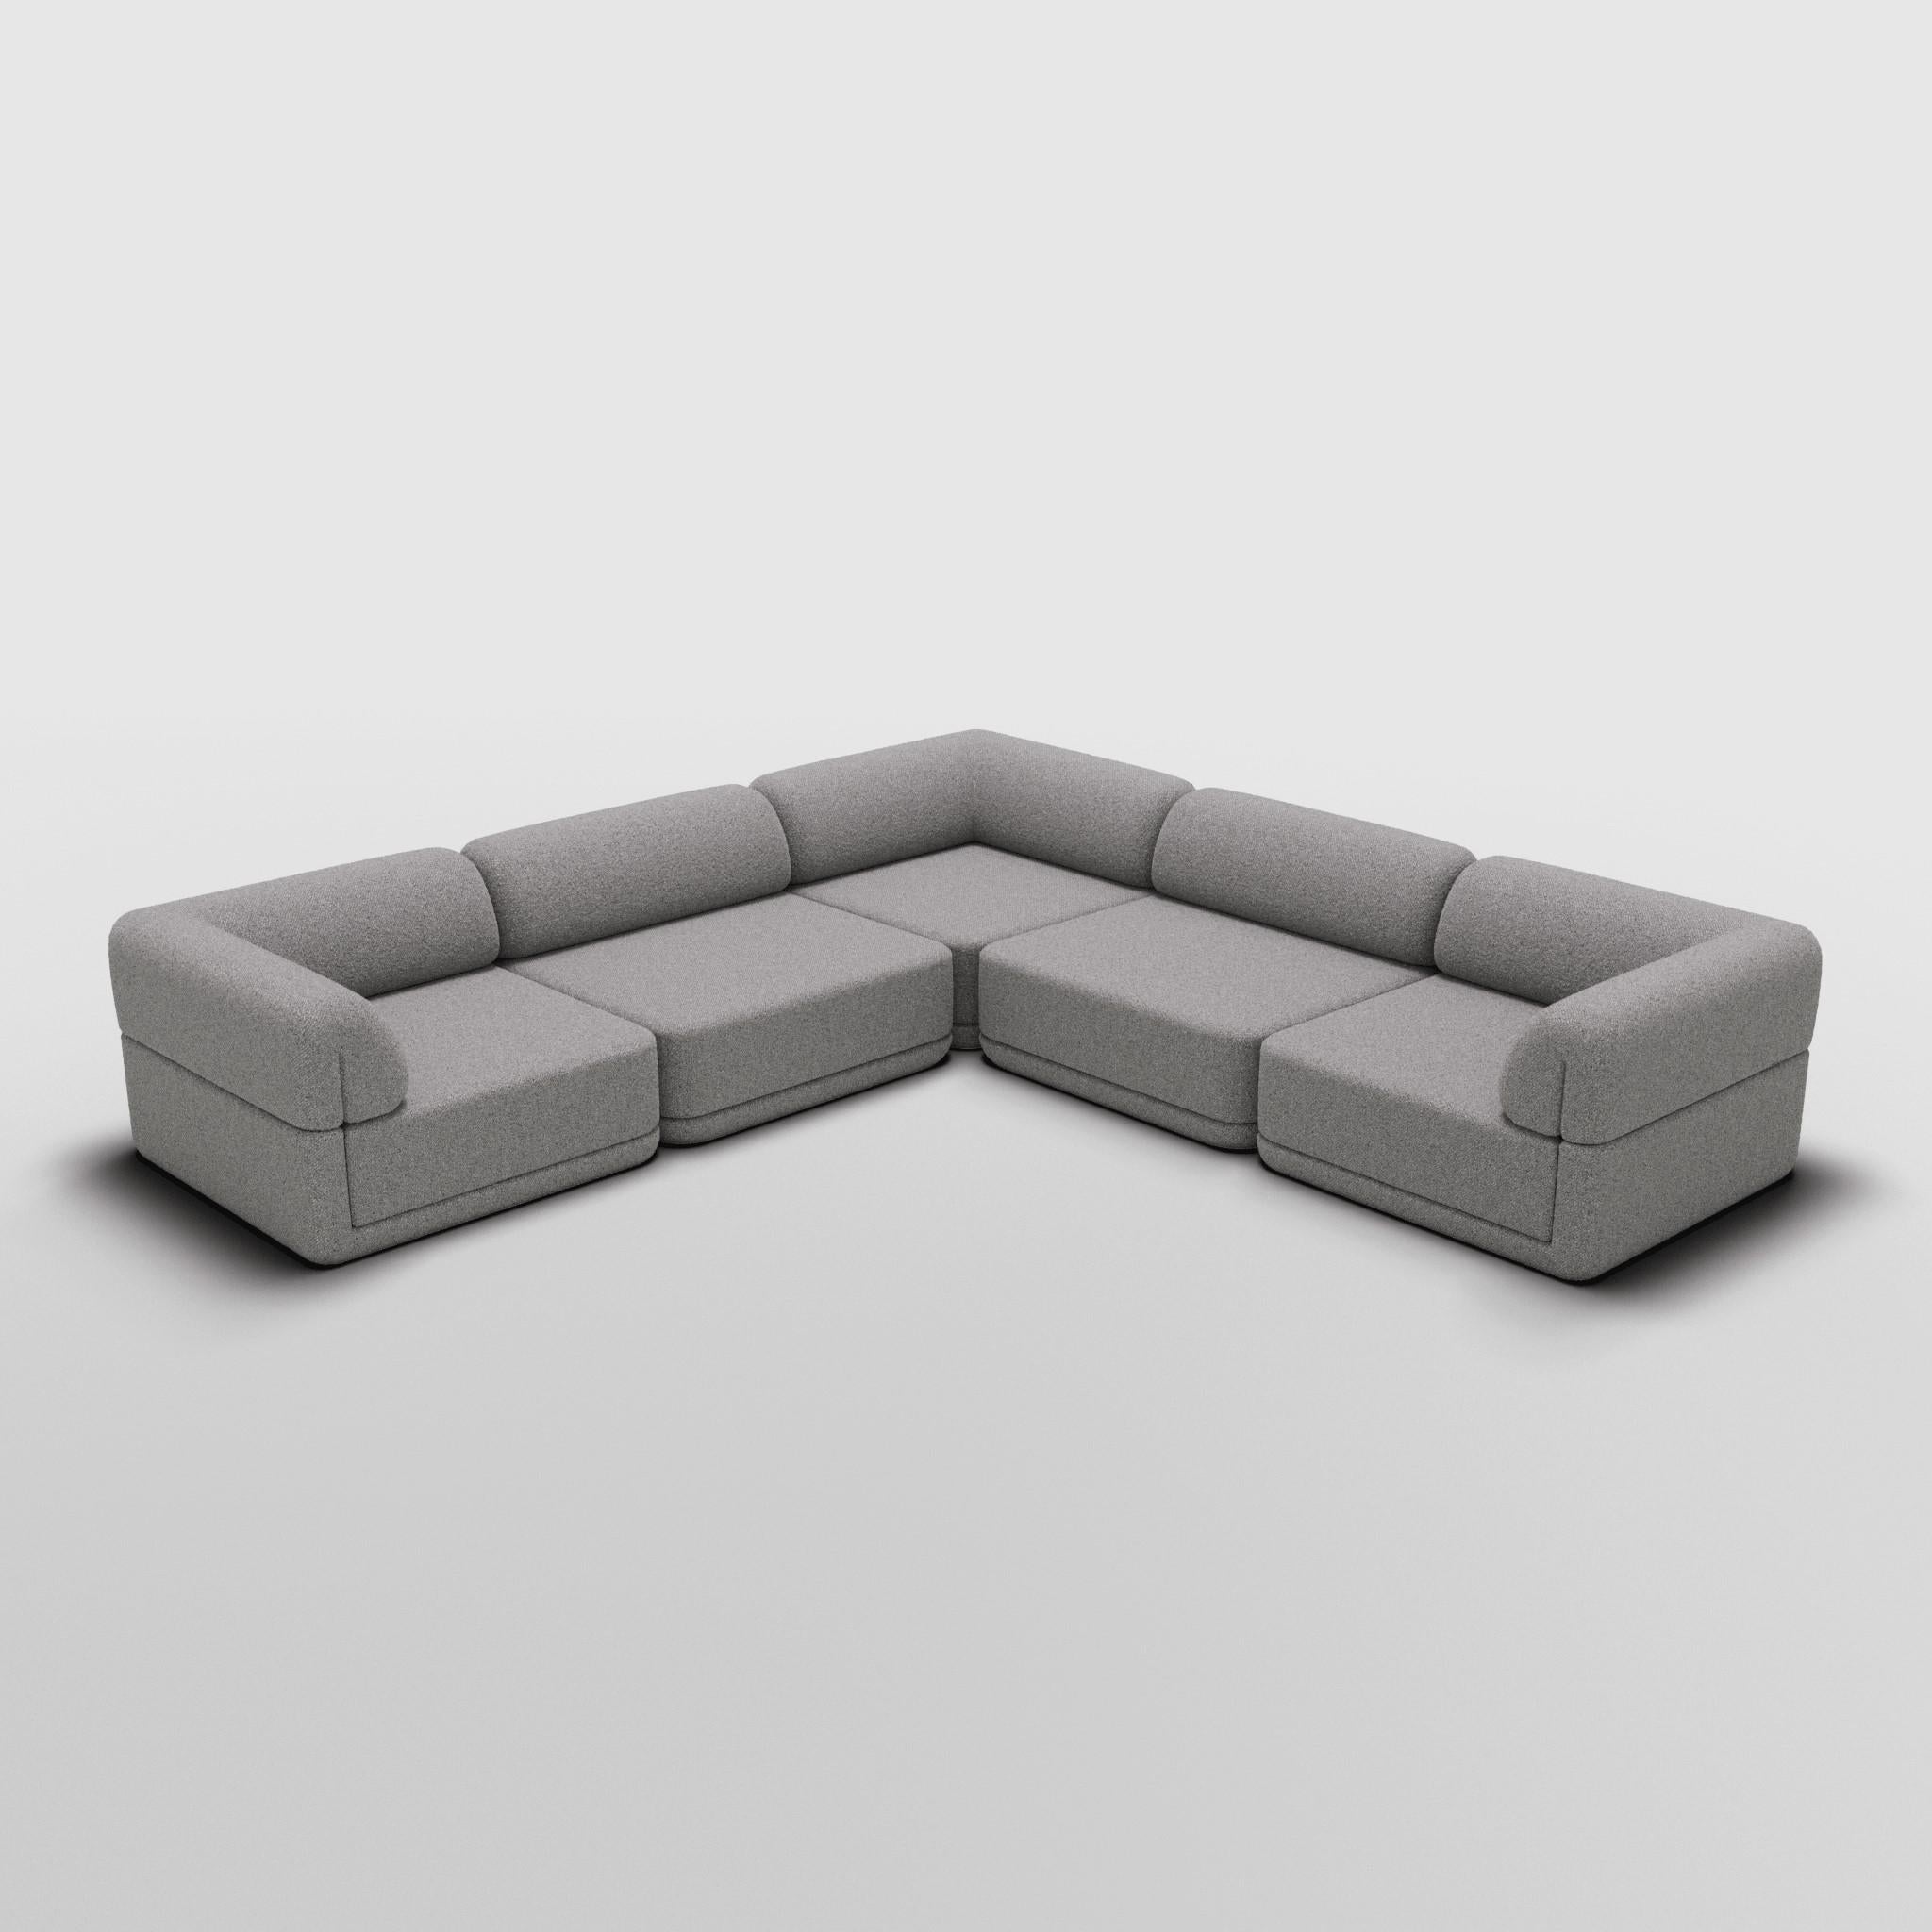 Mid-Century Modern The Cube Sofa - Corner Lounge Sectional For Sale